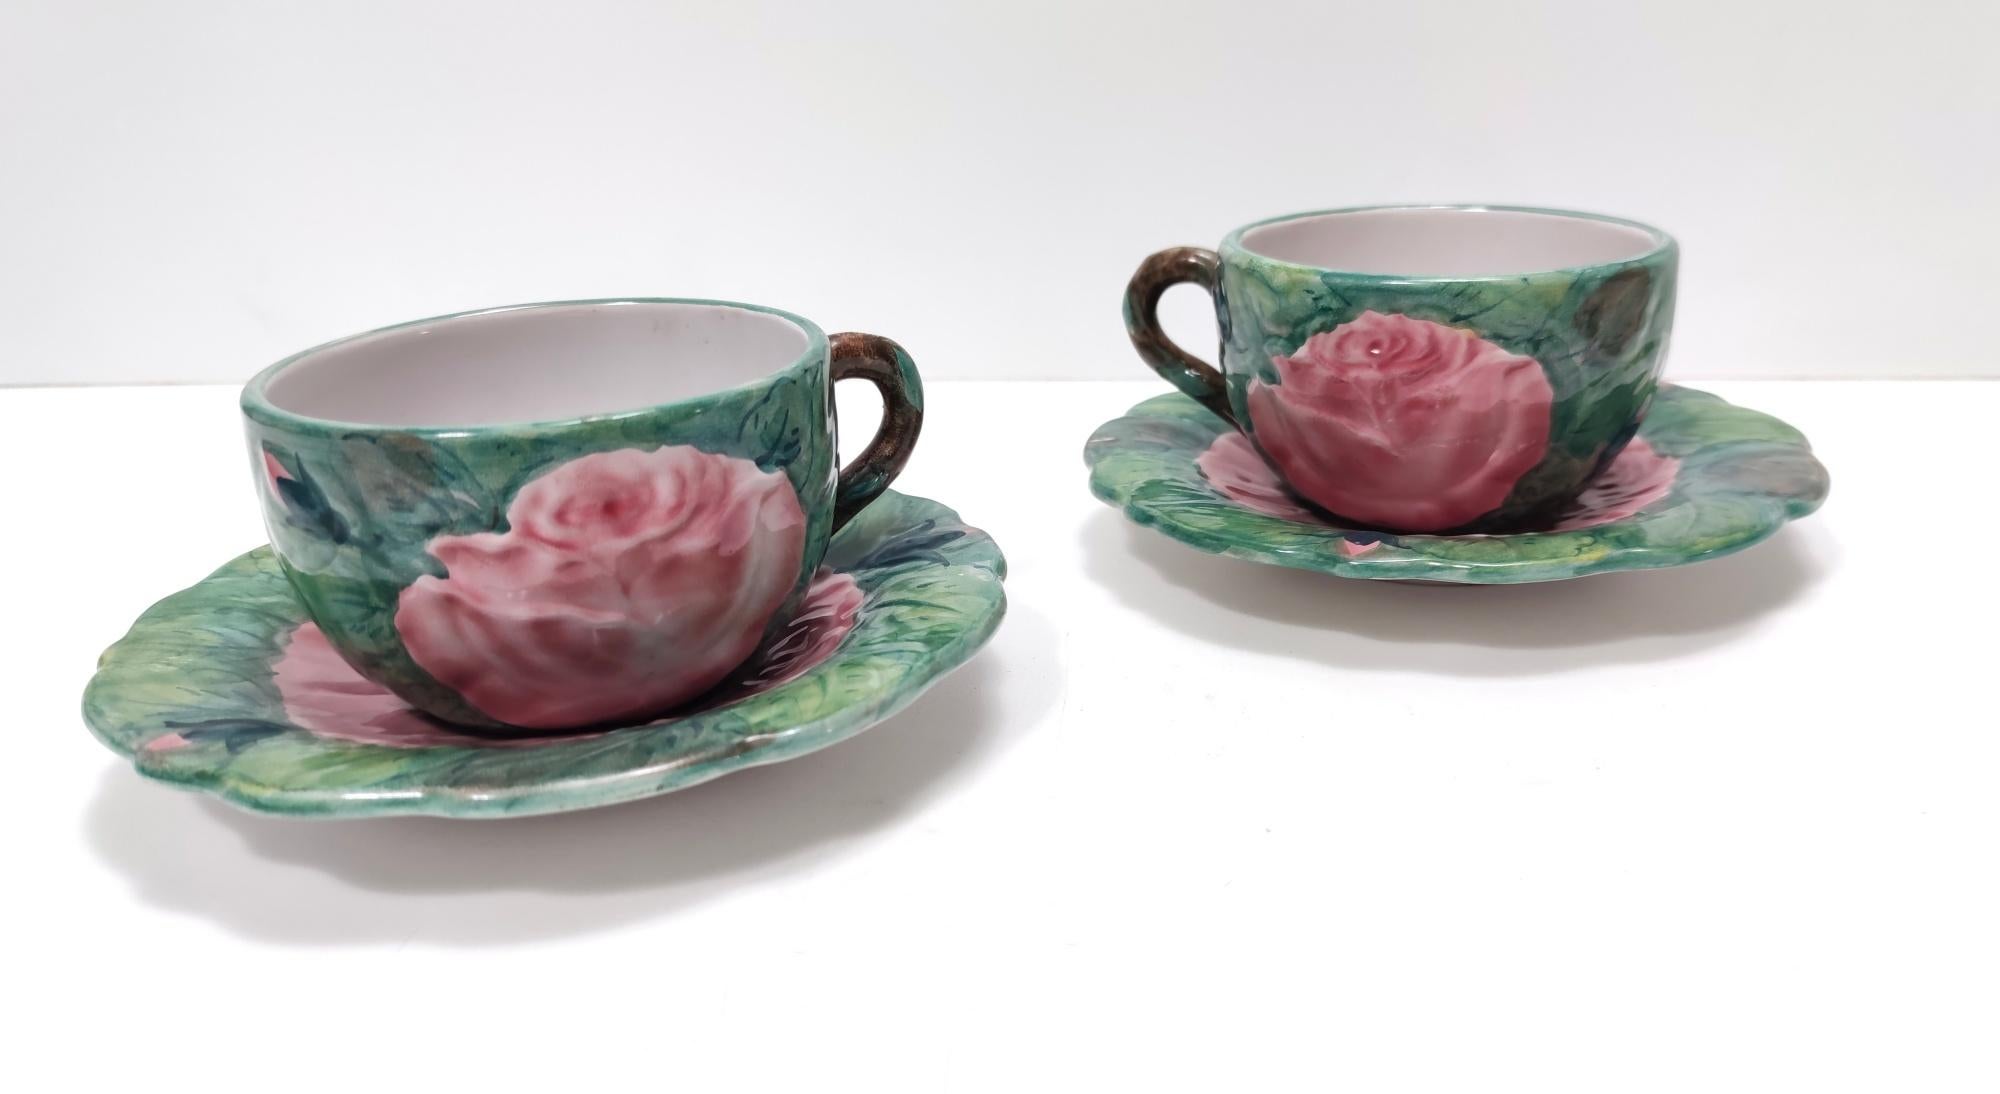 Pair of Vintage Earthenware Tea /Coffee Cups with Floral Motifs by Zaccagnini For Sale 11